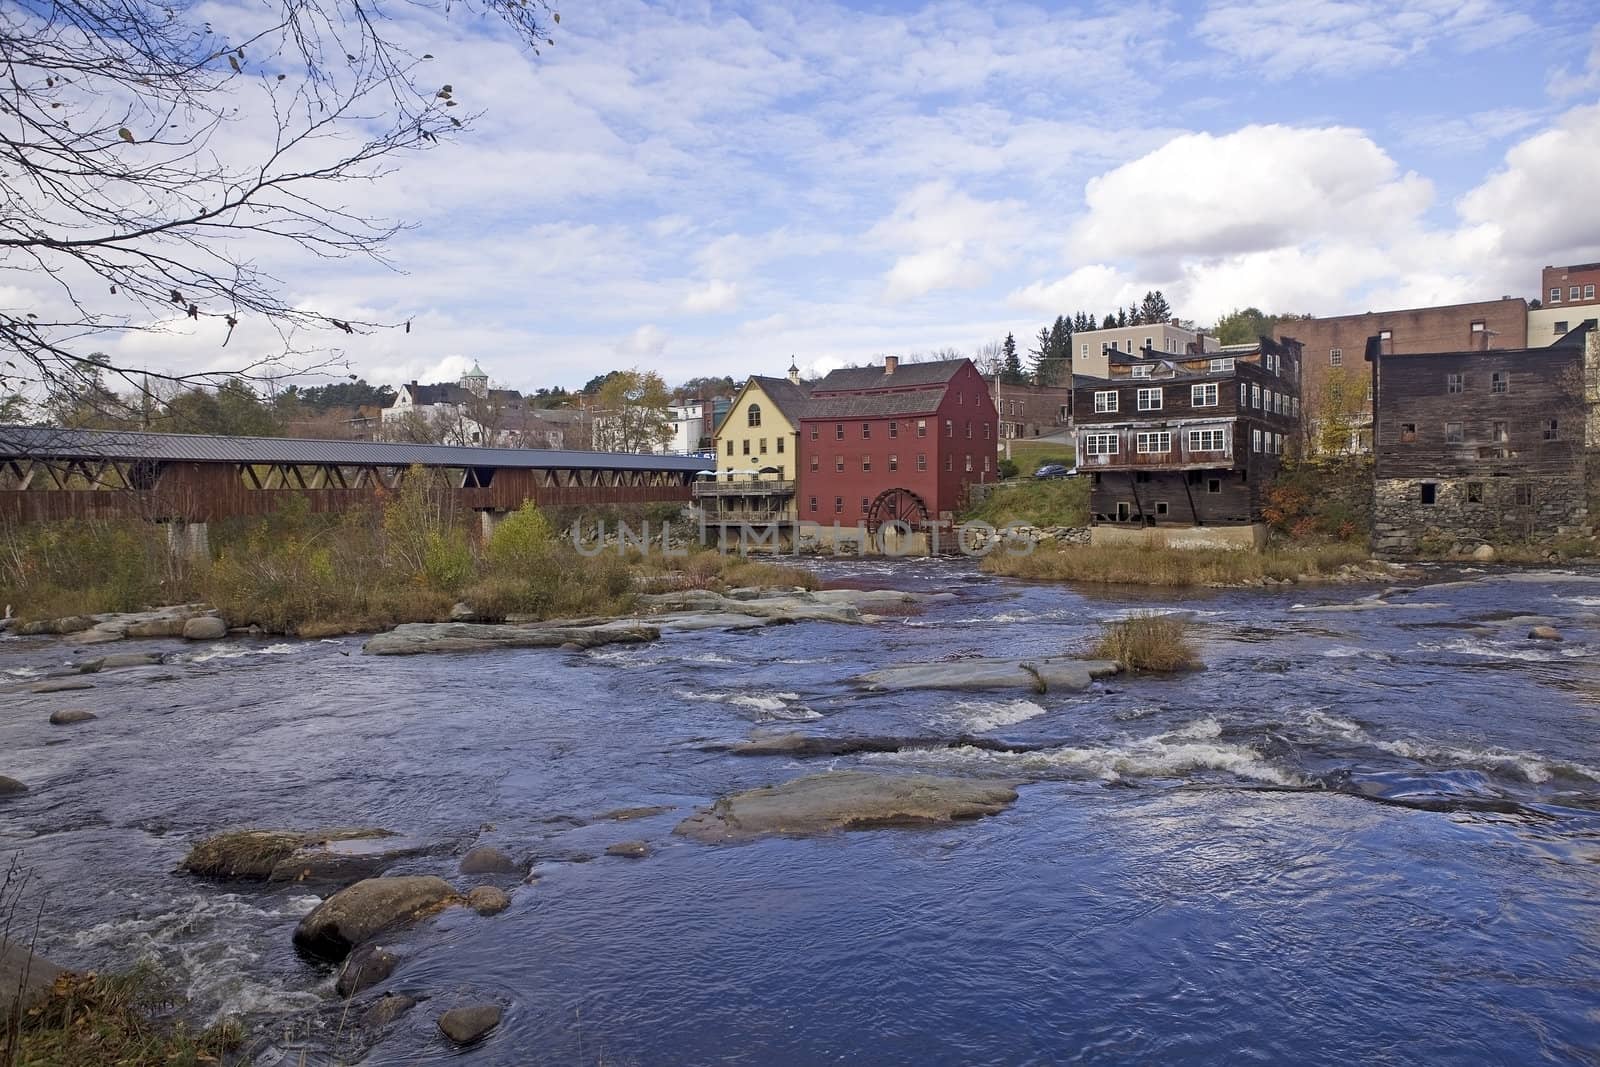 Ammonoosuc River flowing across rocks and under a covered bridge in Littleton, New Hampshire. An old grist mill and water wheel are near the bridge.